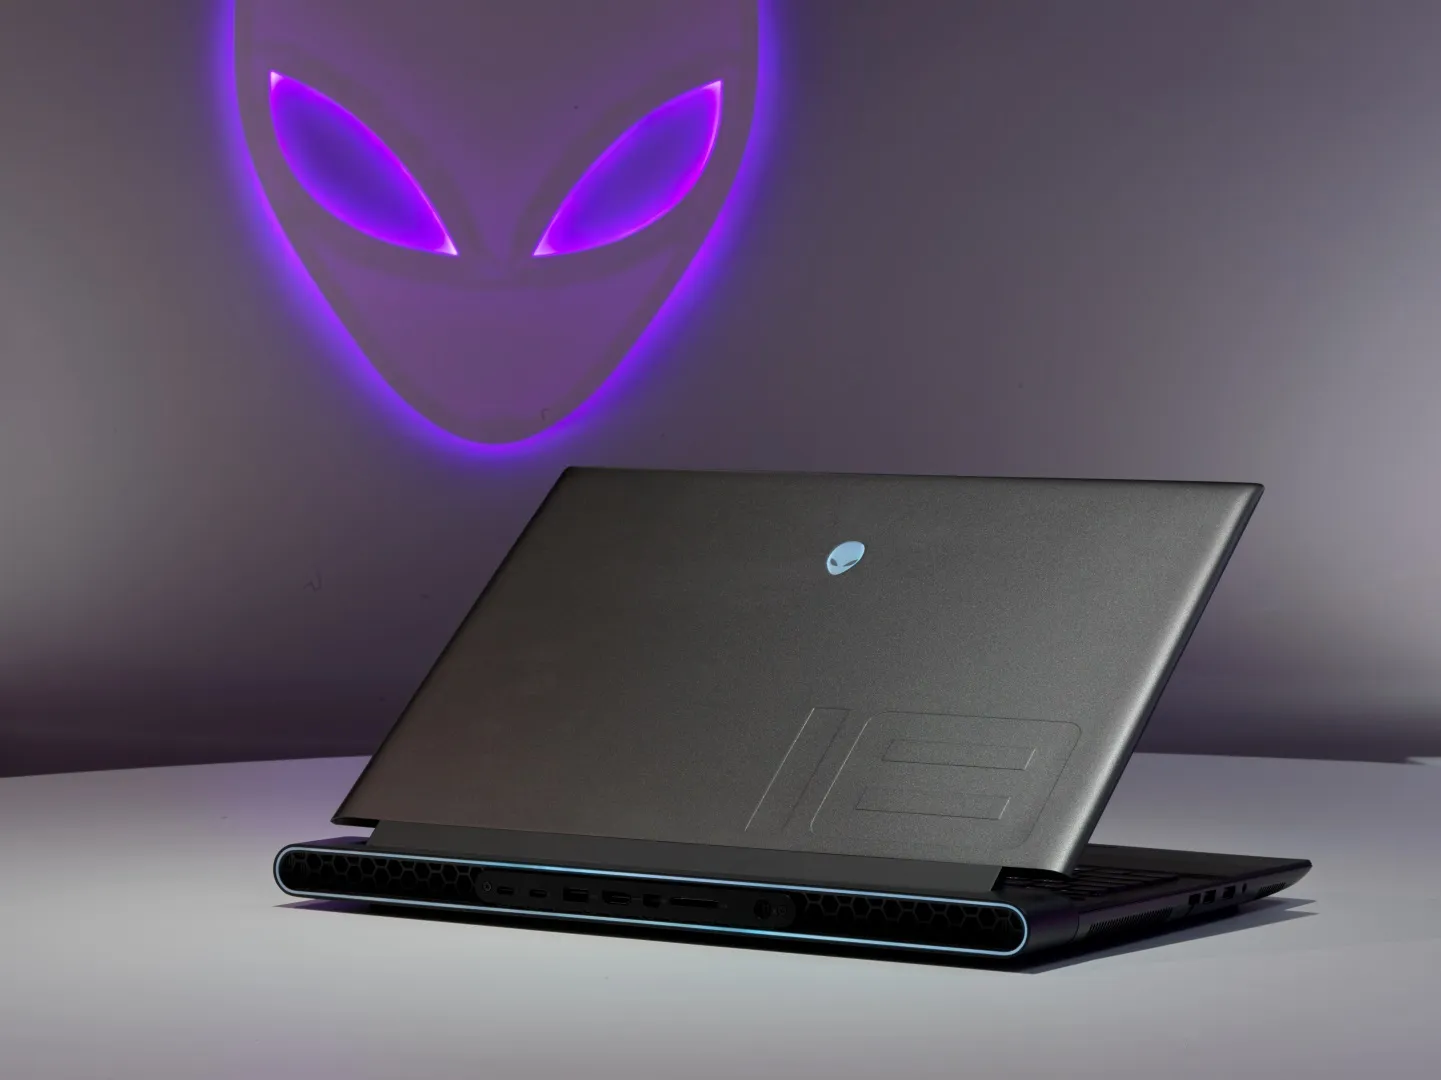 Dell Alienware M18 Introduces AMD Radeon RX 7900M Featuring RDNA 3 Architecture and Chiplet Design